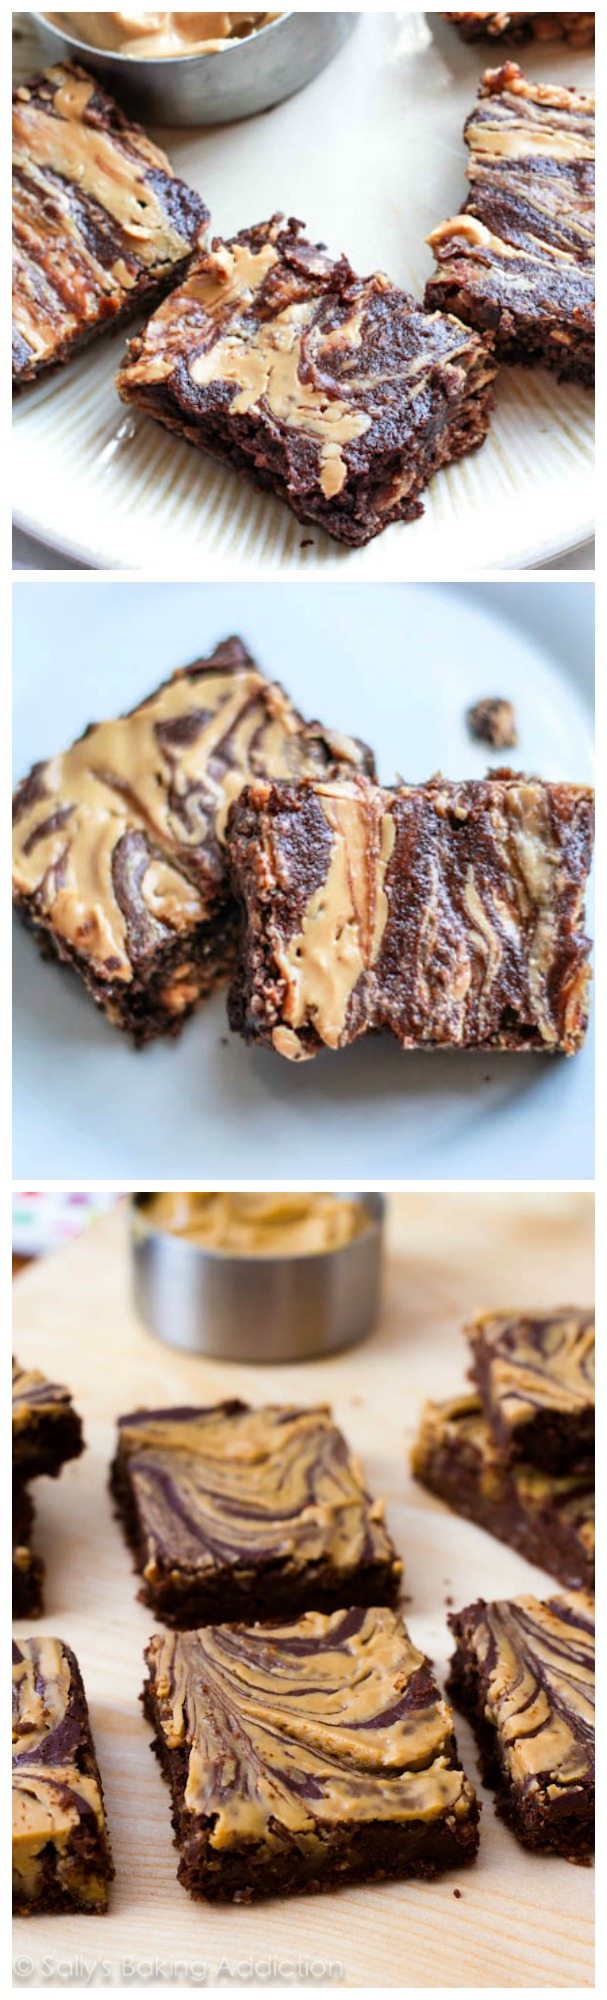 3 images of skinny peanut butter swirl brownies